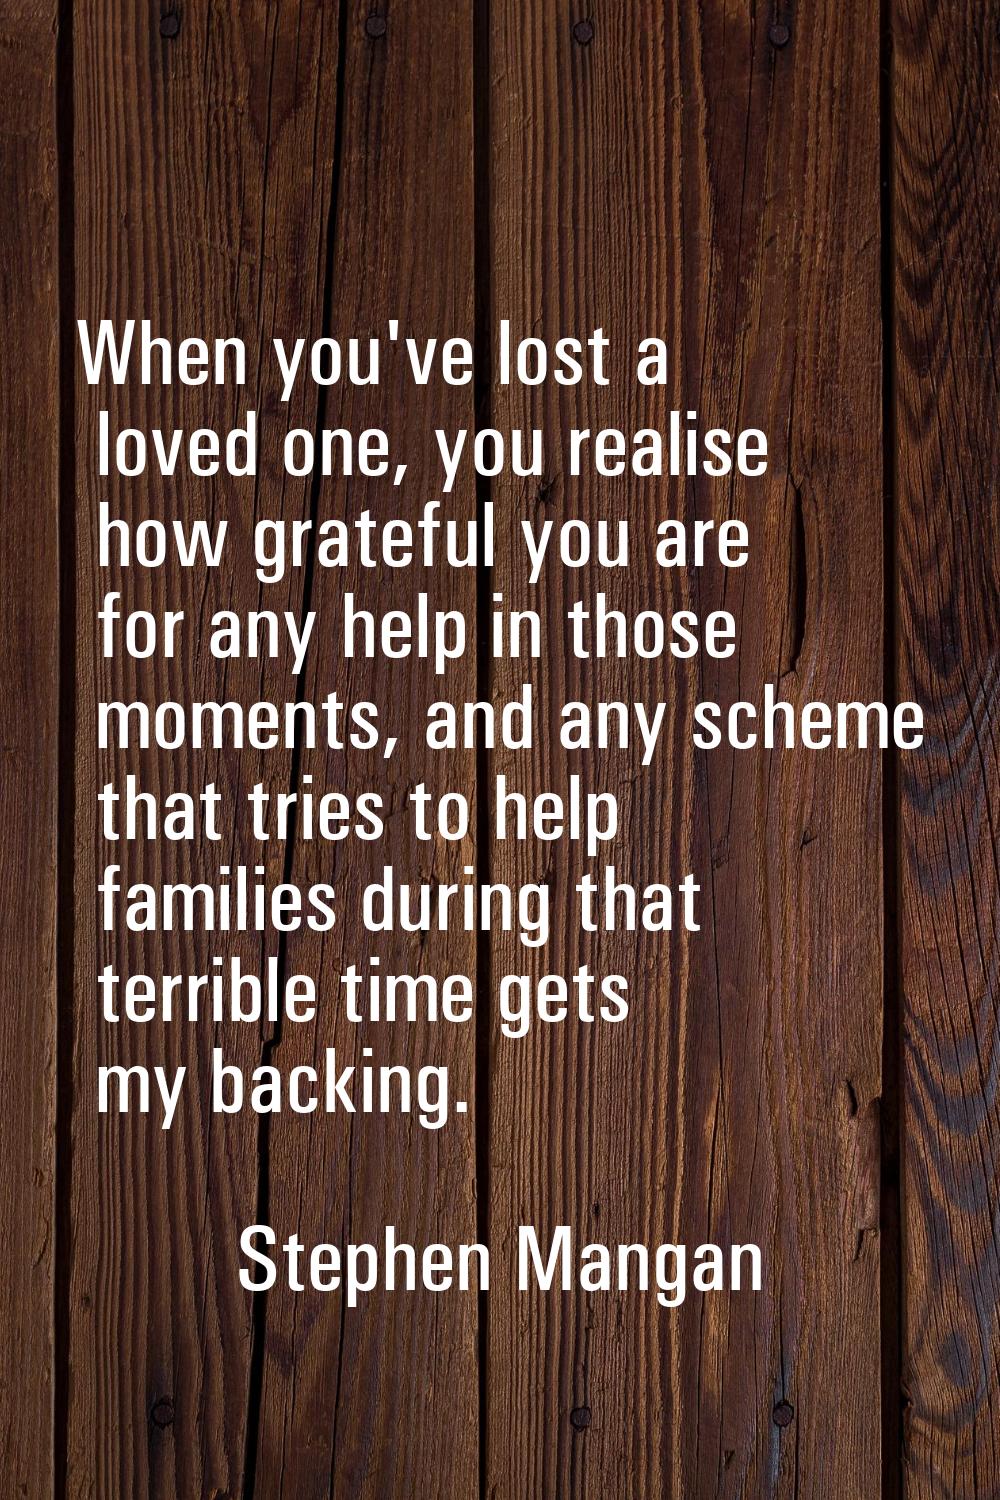 When you've lost a loved one, you realise how grateful you are for any help in those moments, and a